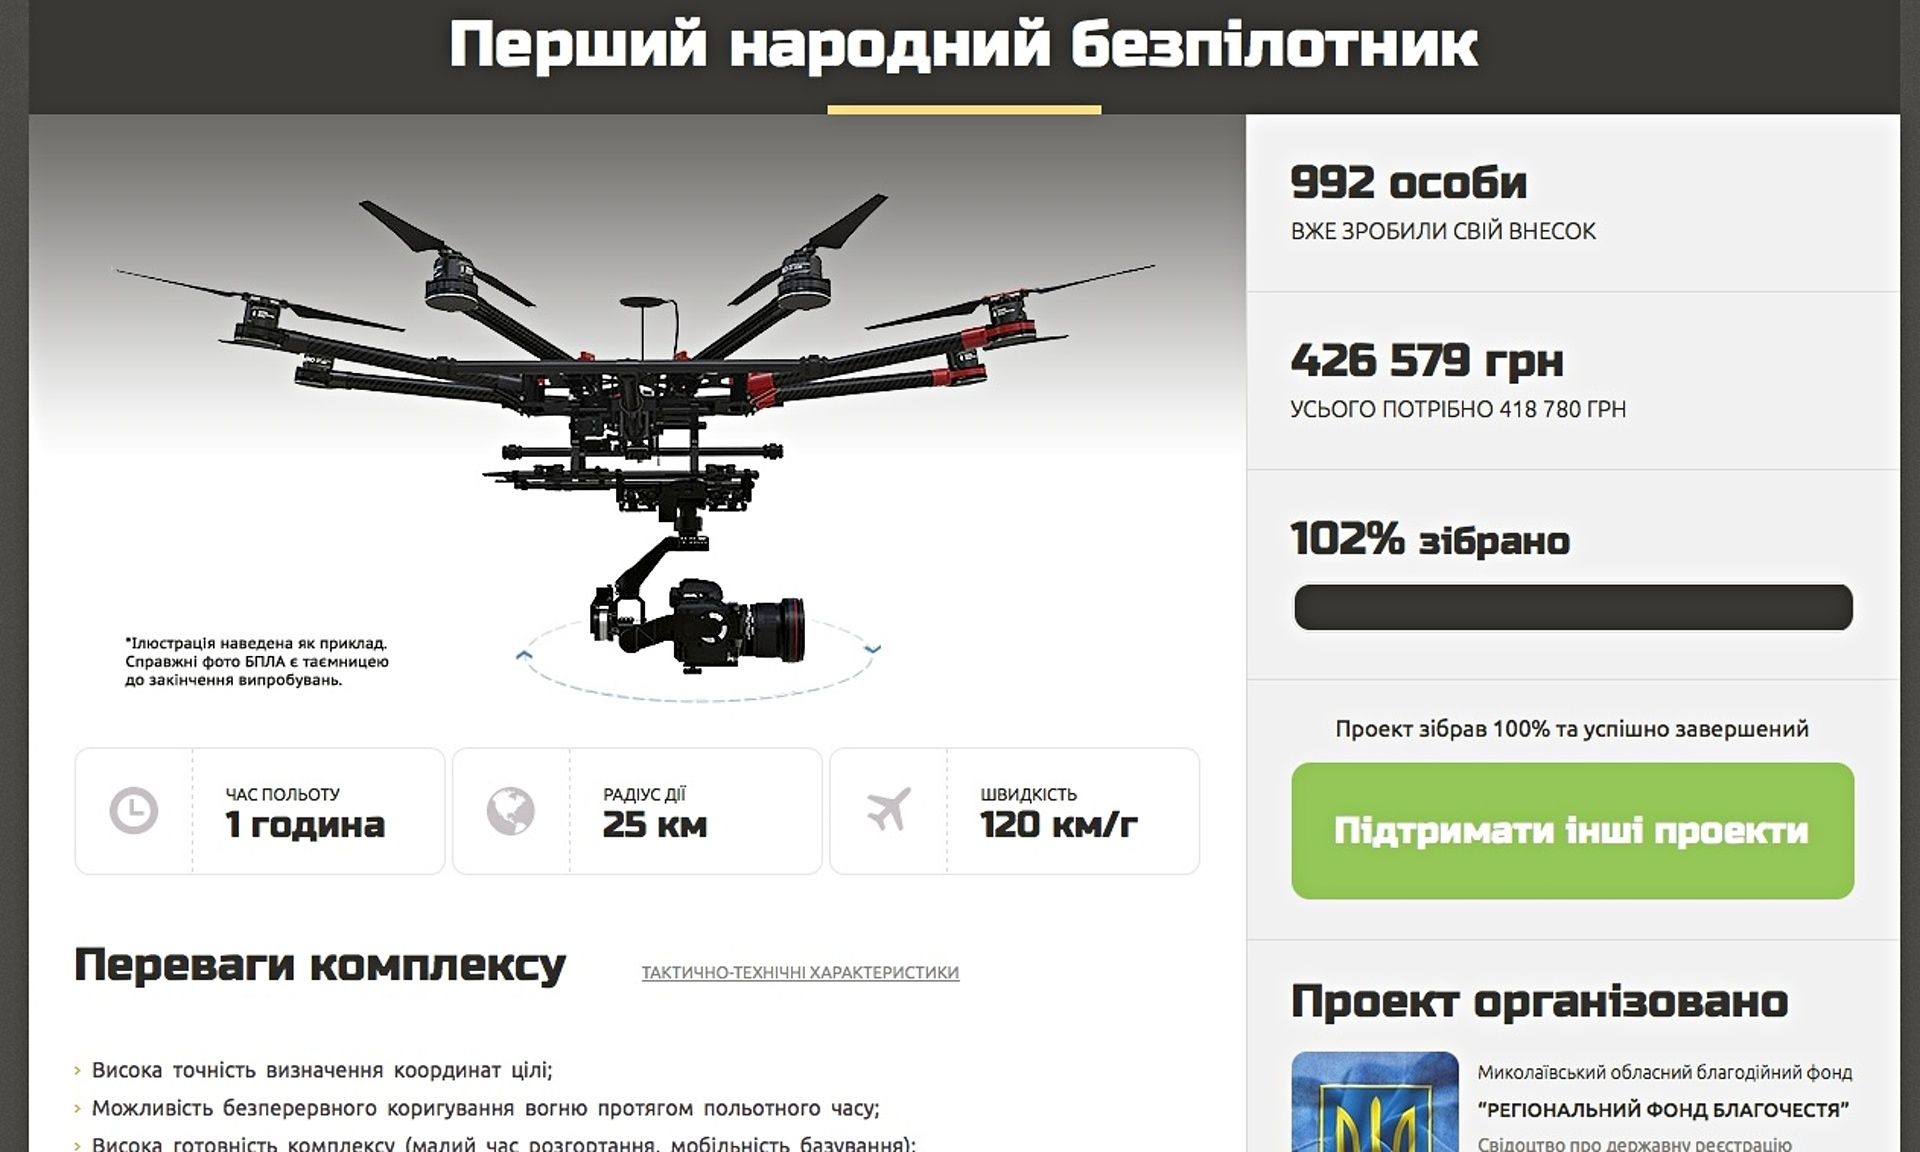 Ukrainians crowdfund to raise cash for ‘people’s drone’ to help outgunned army